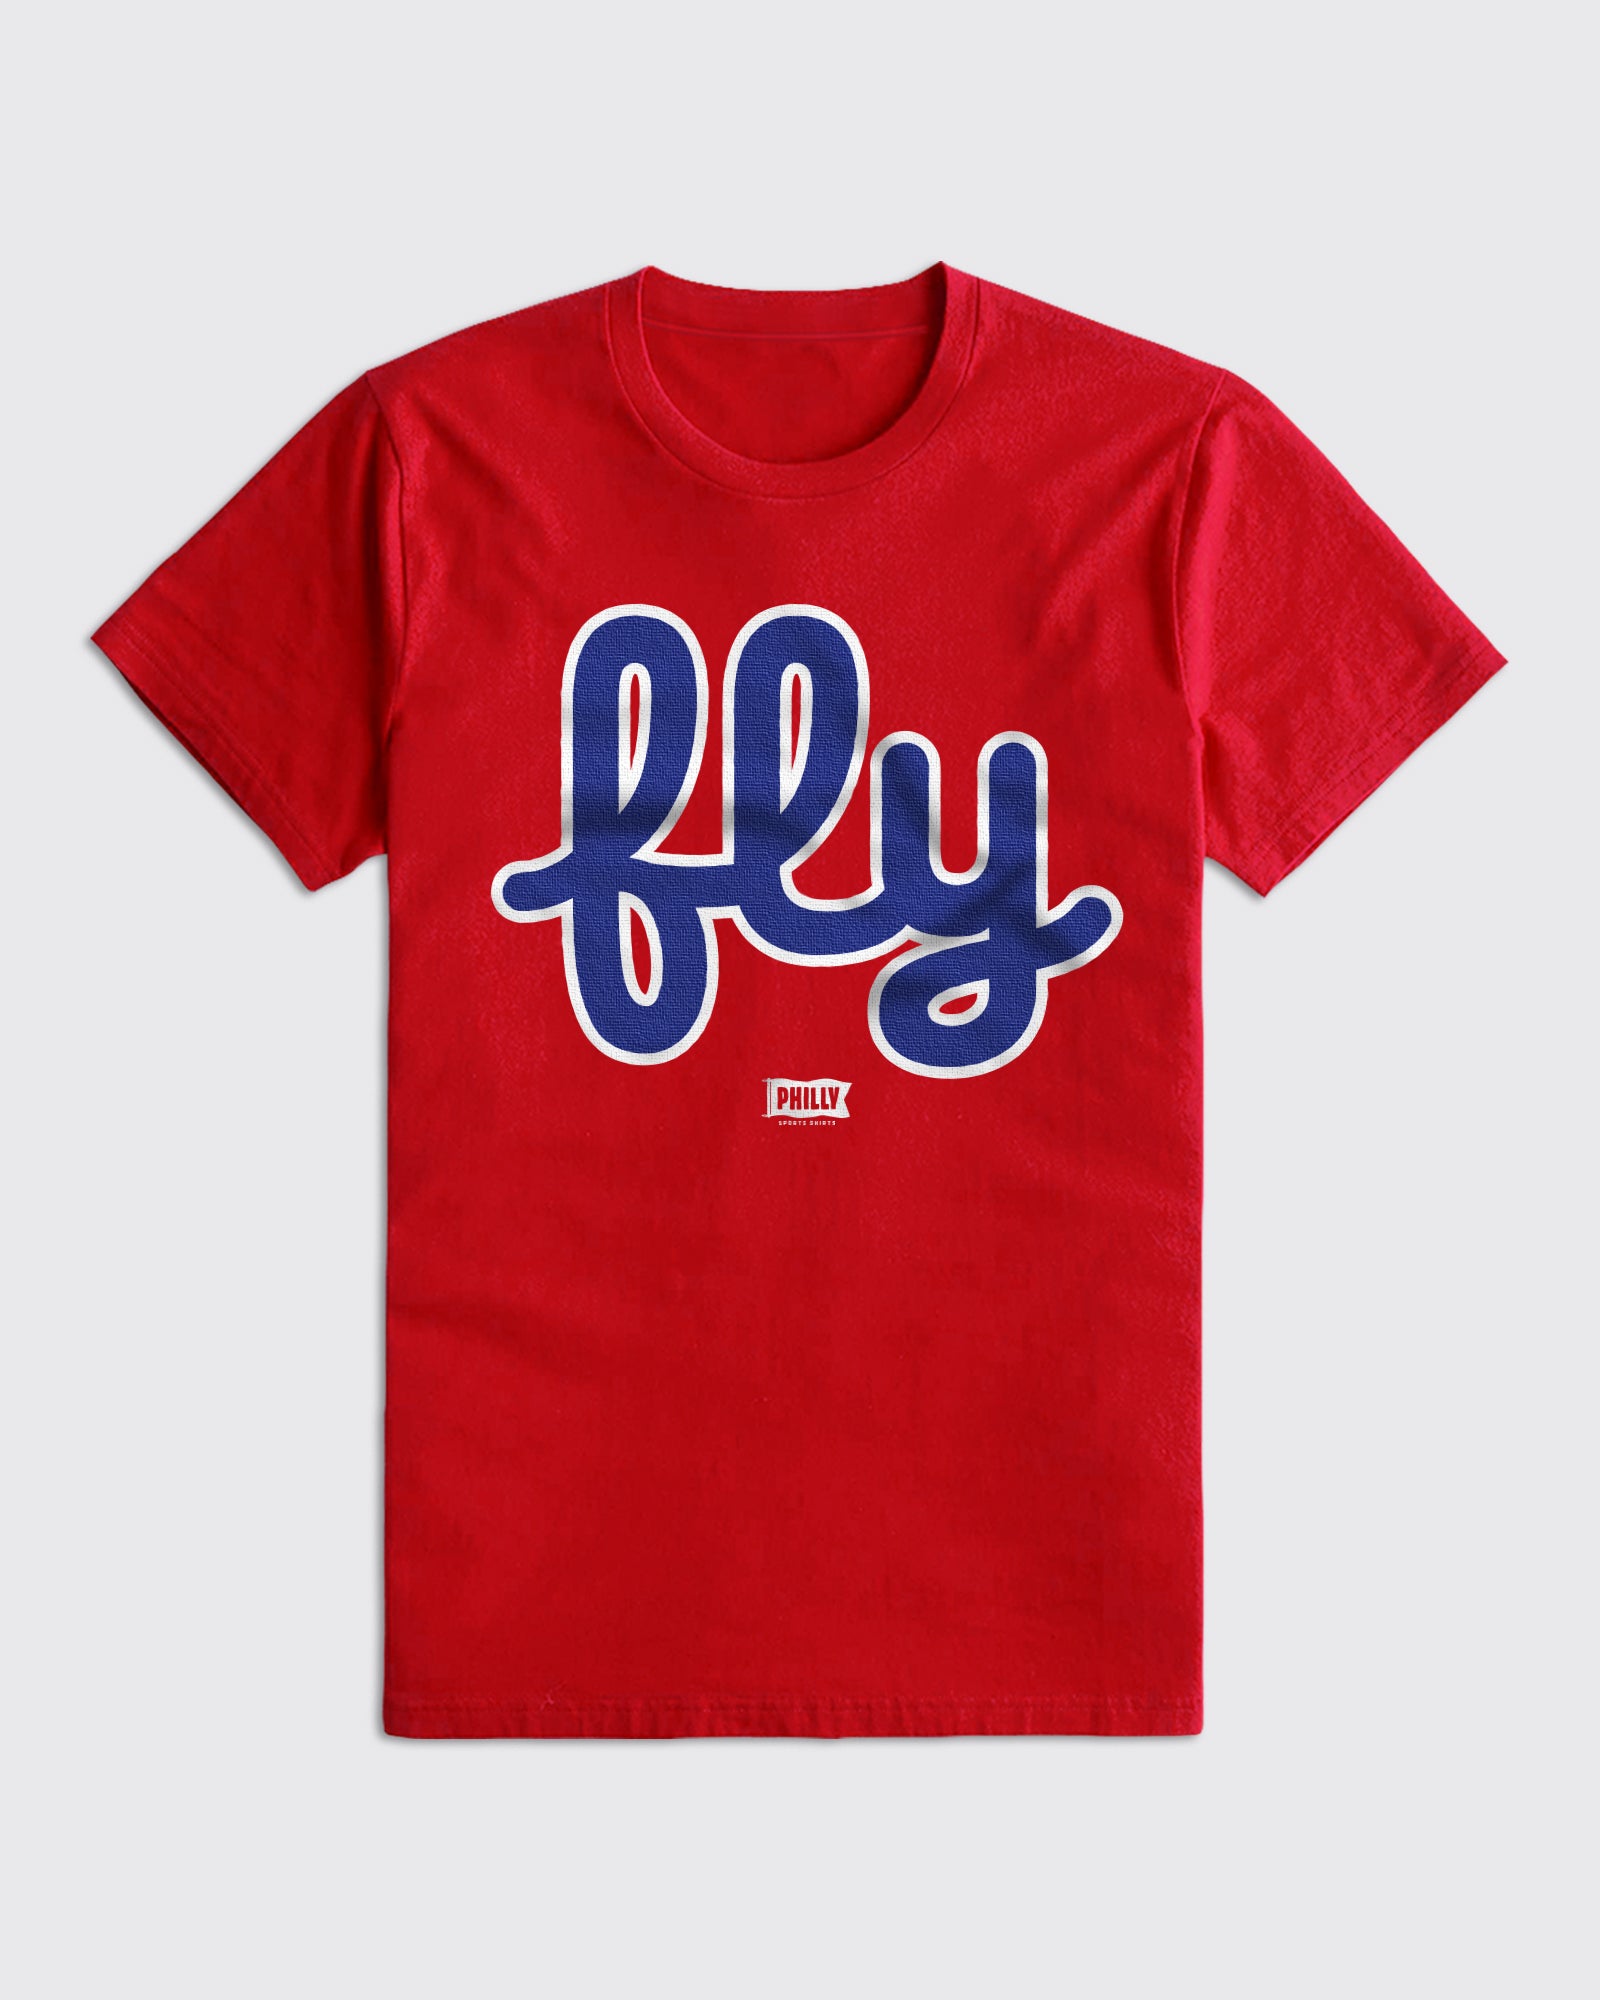 Phillies Fly Shirt - Phillies, T-Shirts - Philly Sports Shirts